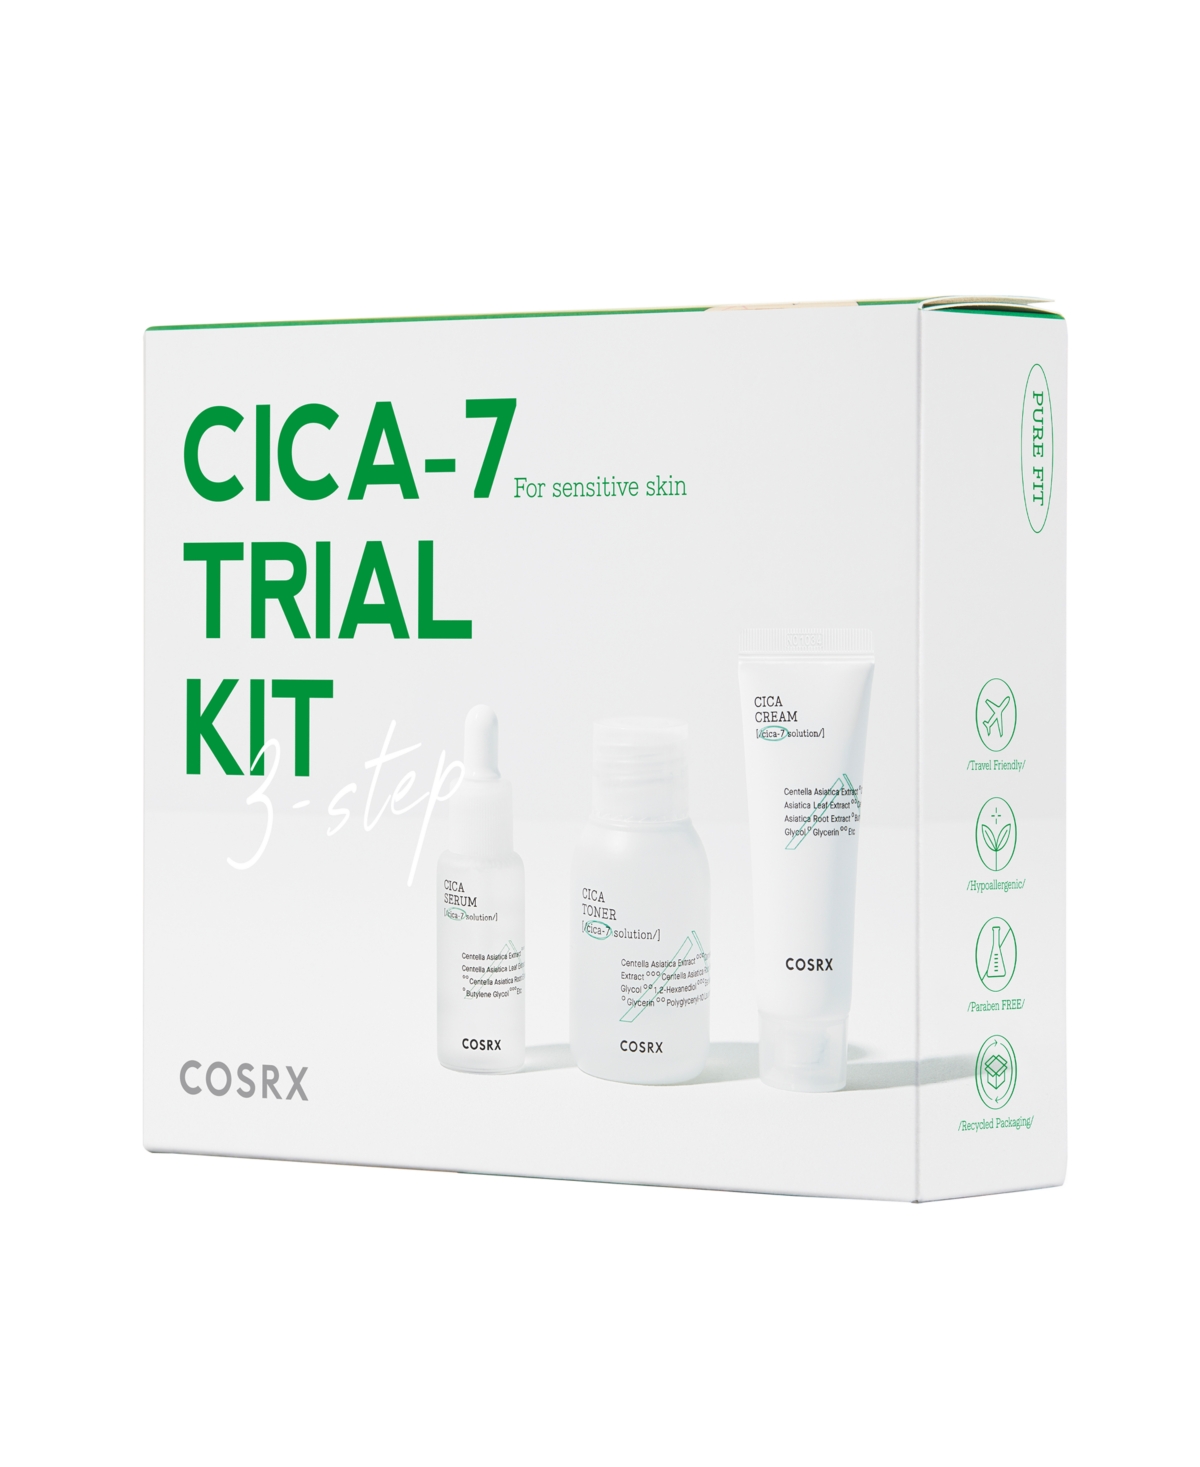 Pure Fit Cica Trial Kit